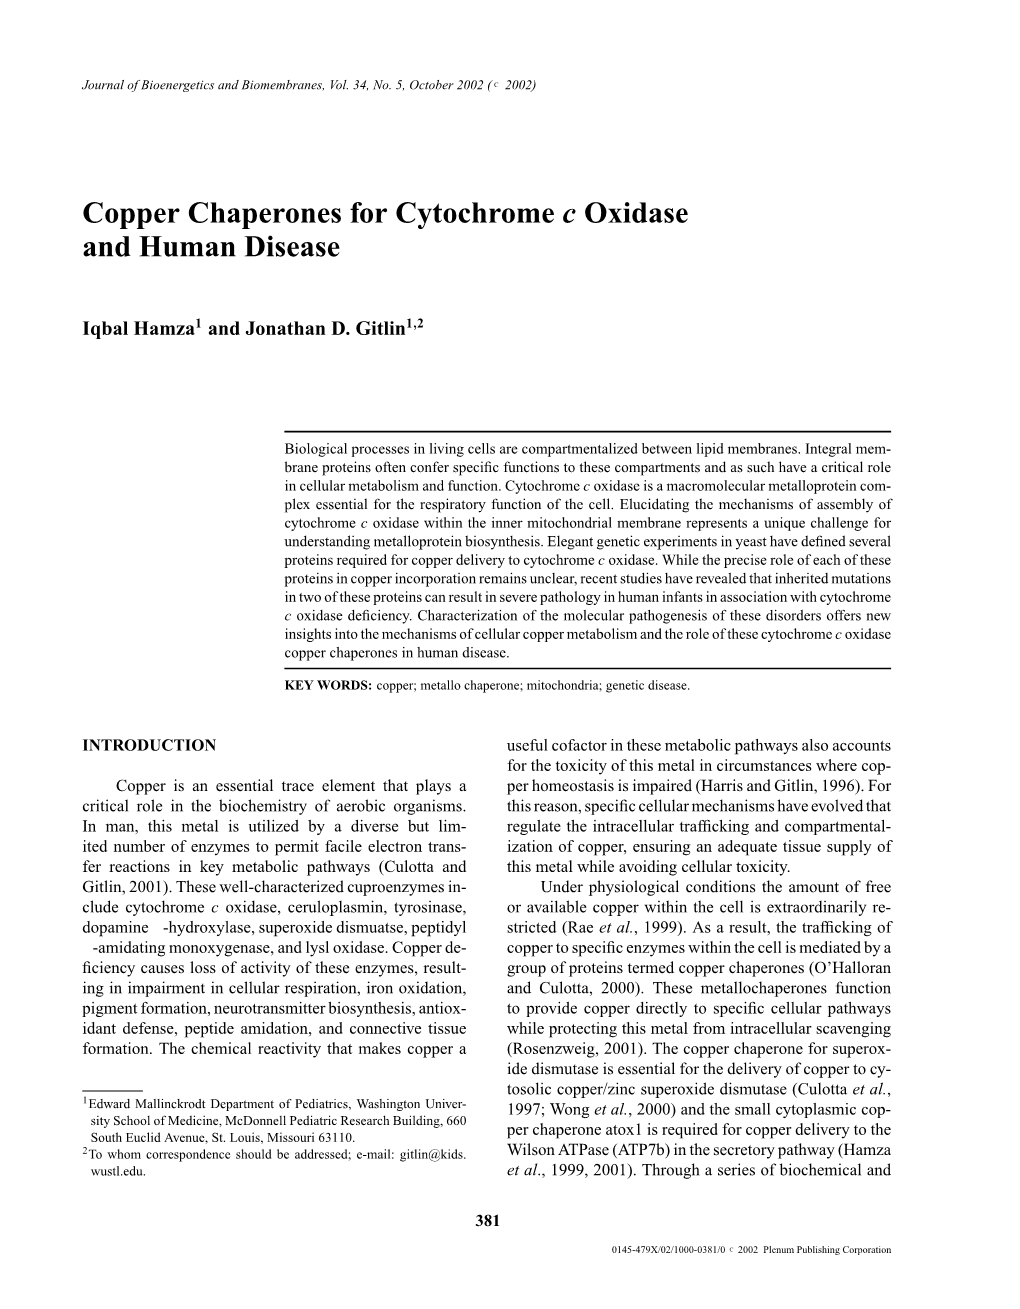 Copper Chaperones for Cytochrome C Oxidase and Human Disease